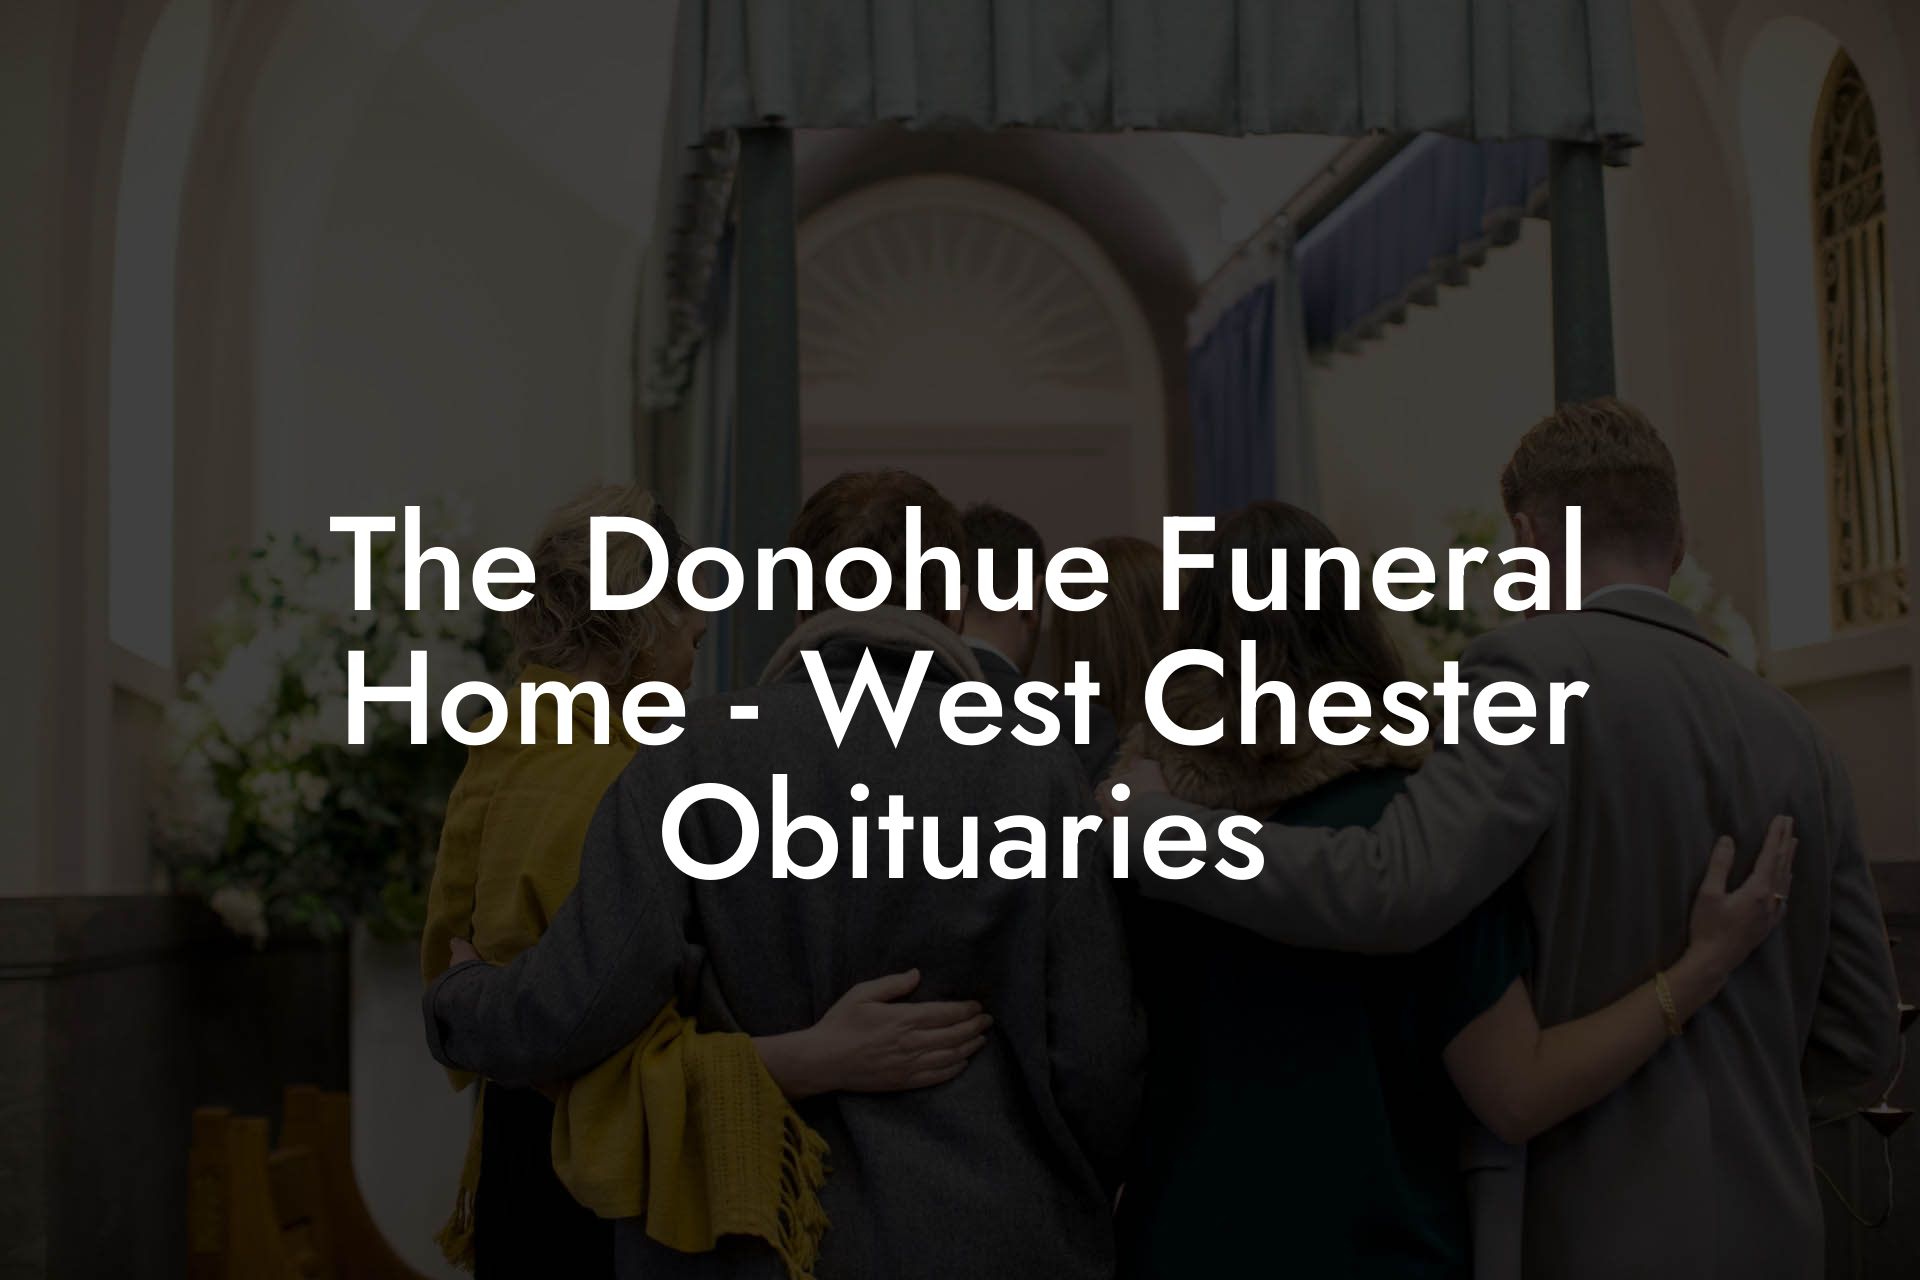 The Donohue Funeral Home - West Chester Obituaries